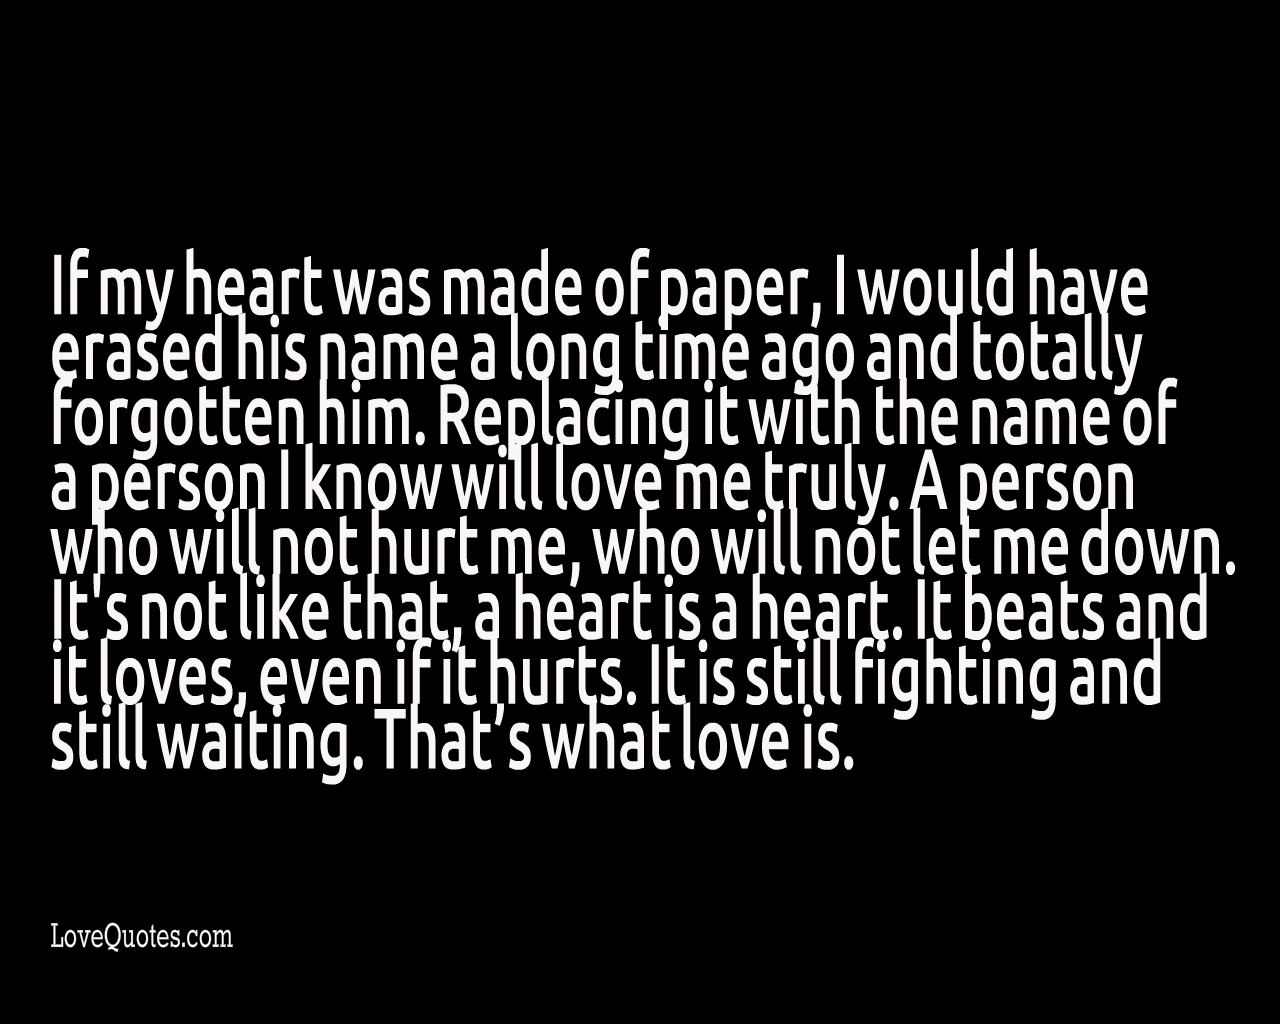 If Heart Was Made Of Paper